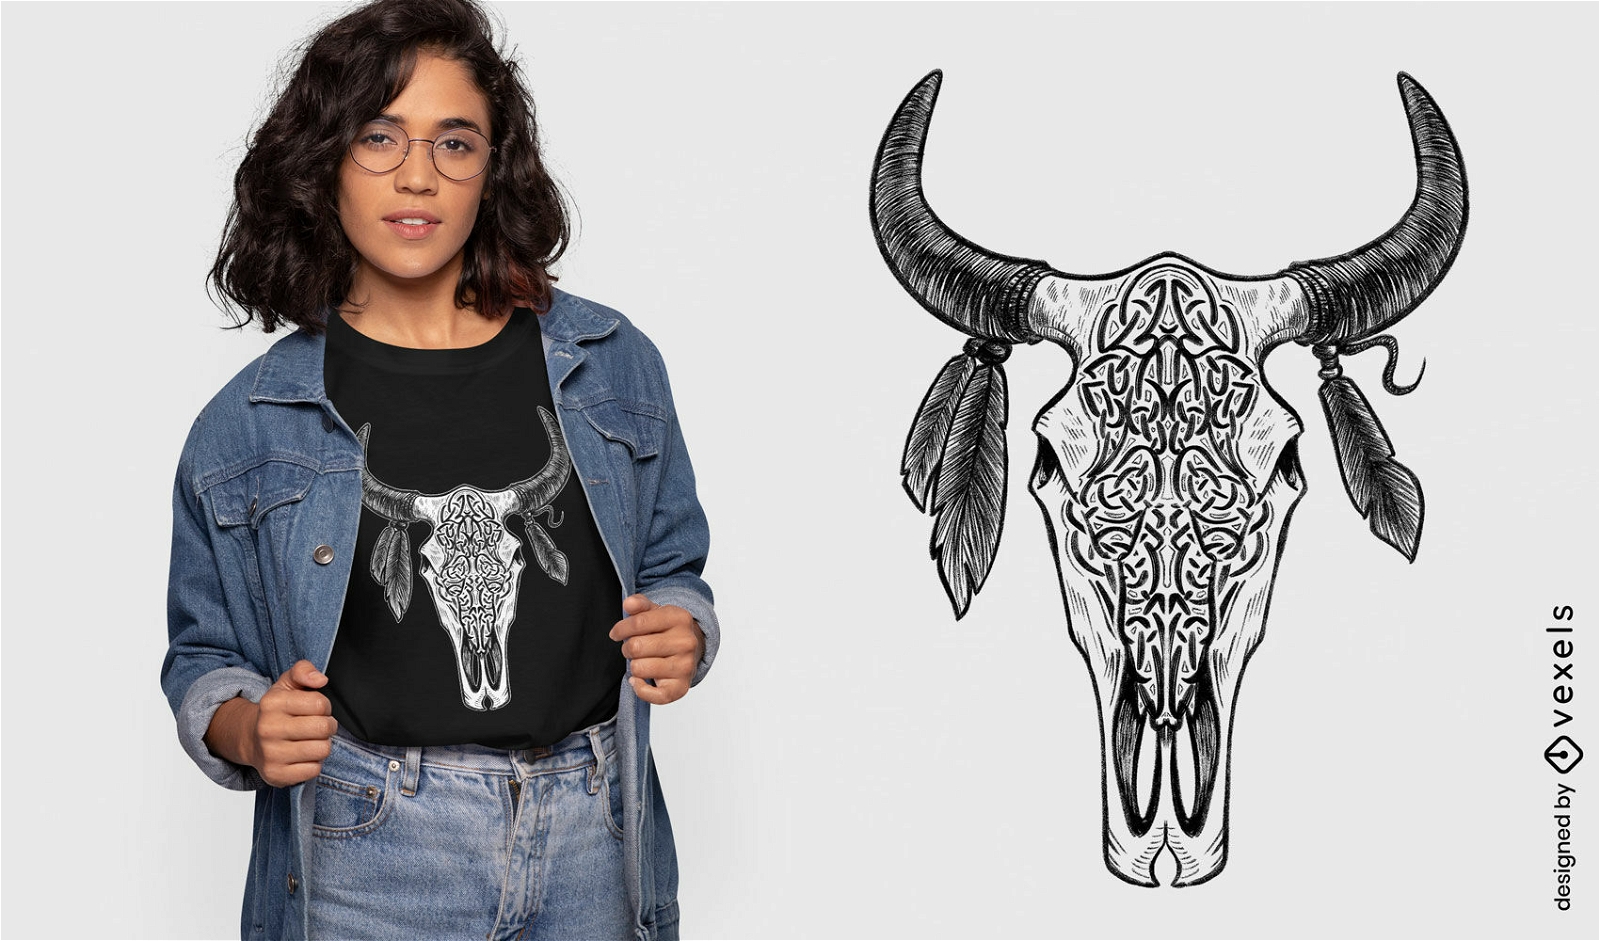 Bull skull with feathers t-shirt design